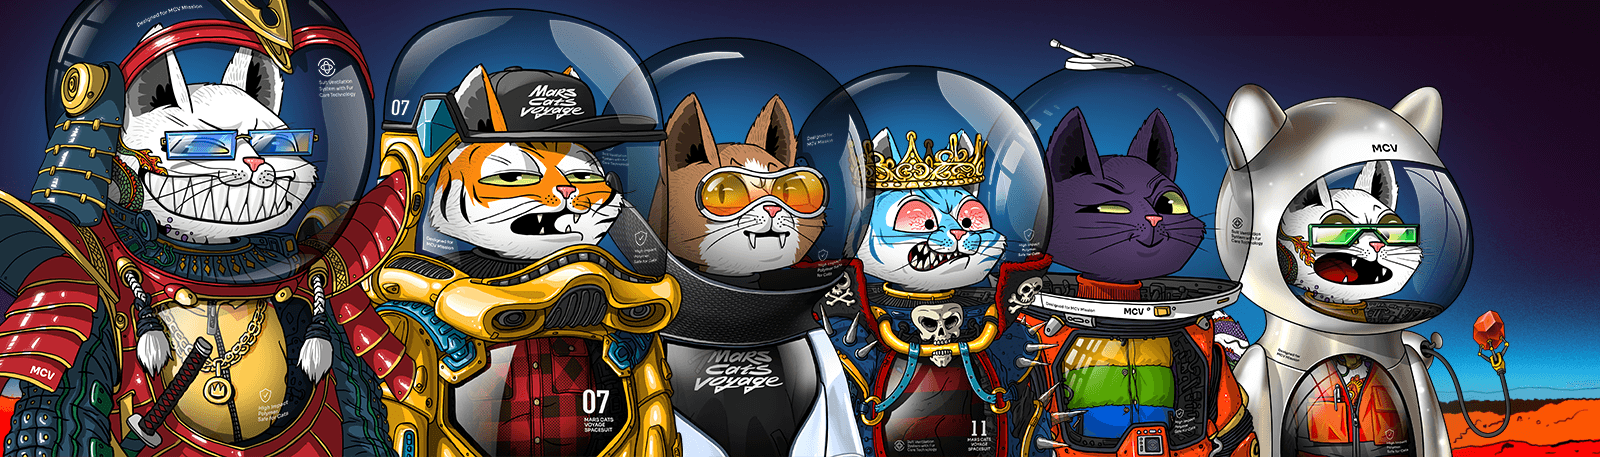 Mars Cats in Spacesuits